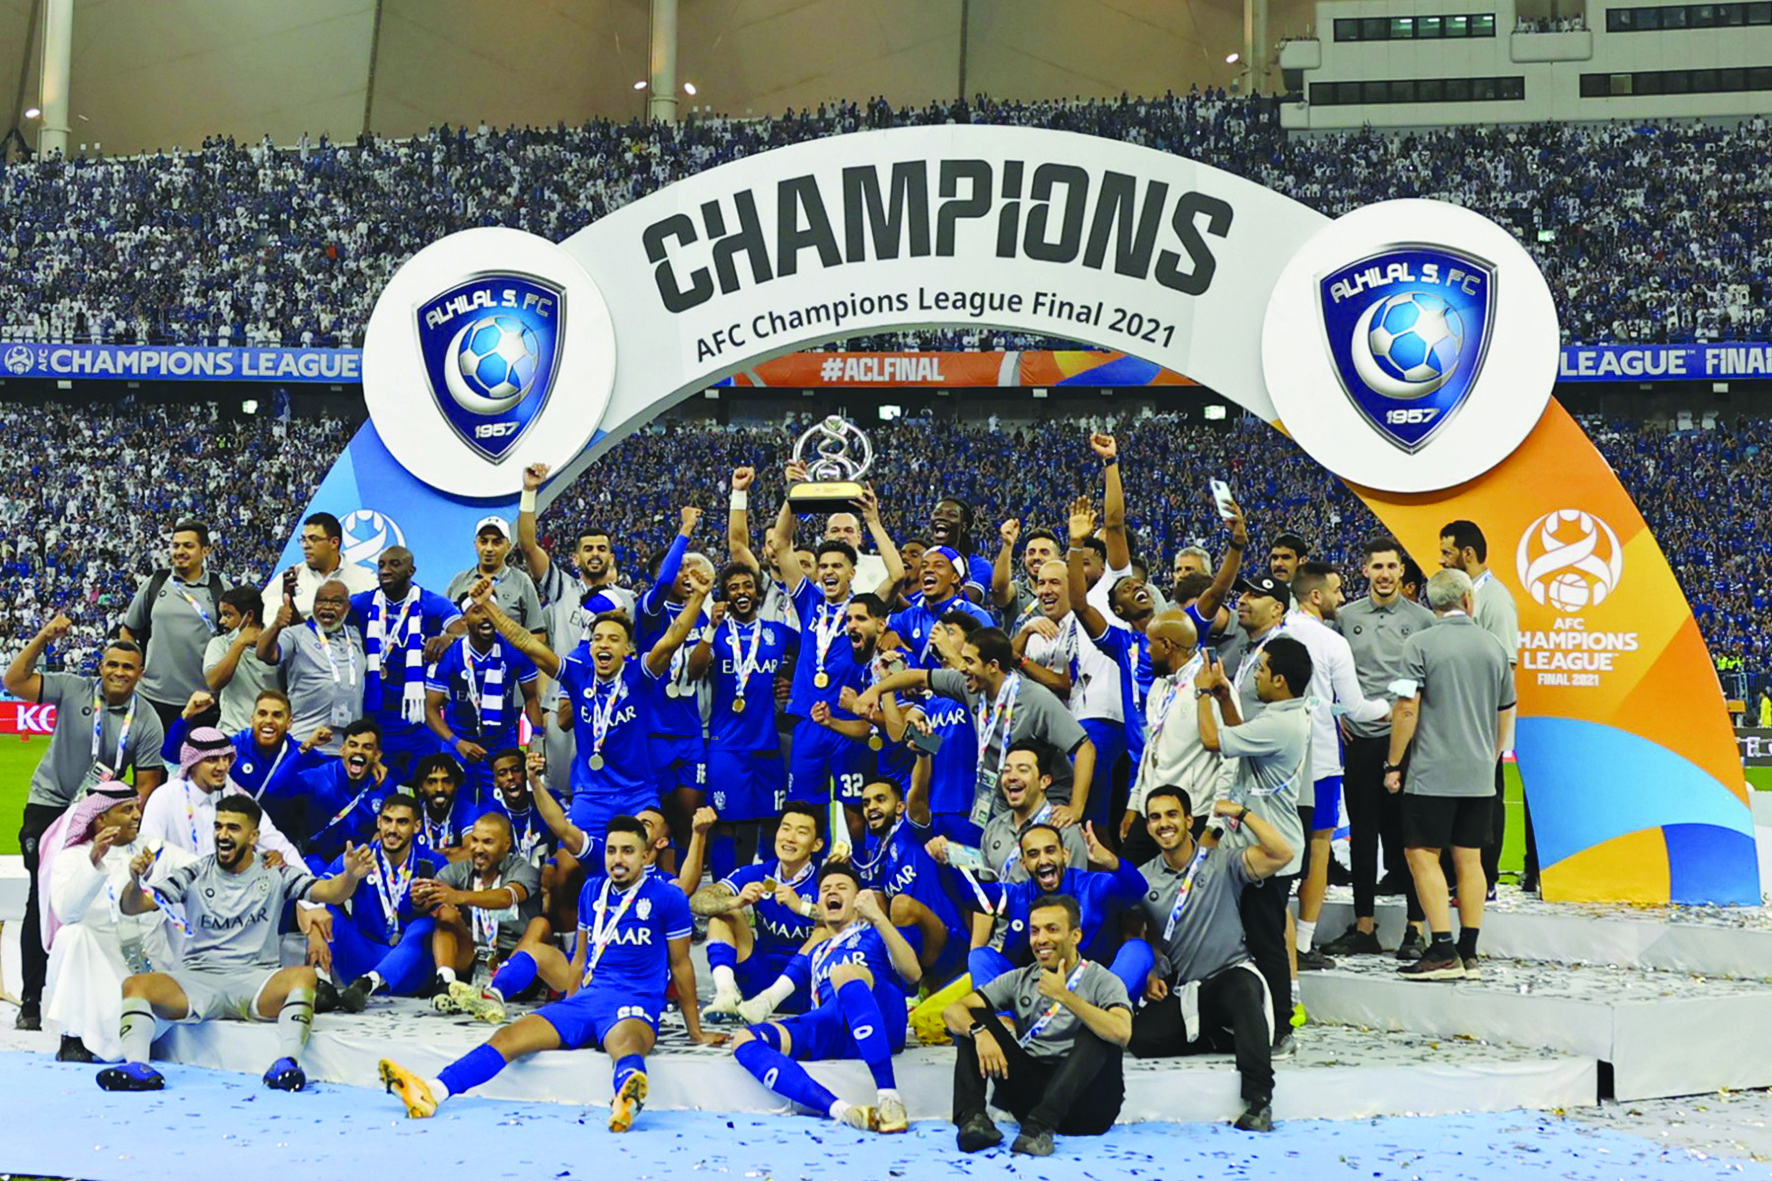 RIYADH: Hilal's players celebrate with the trophy after winning the AFC Champions League final football match against South Korea's Pohang Steelers yesterday. — AFP photos